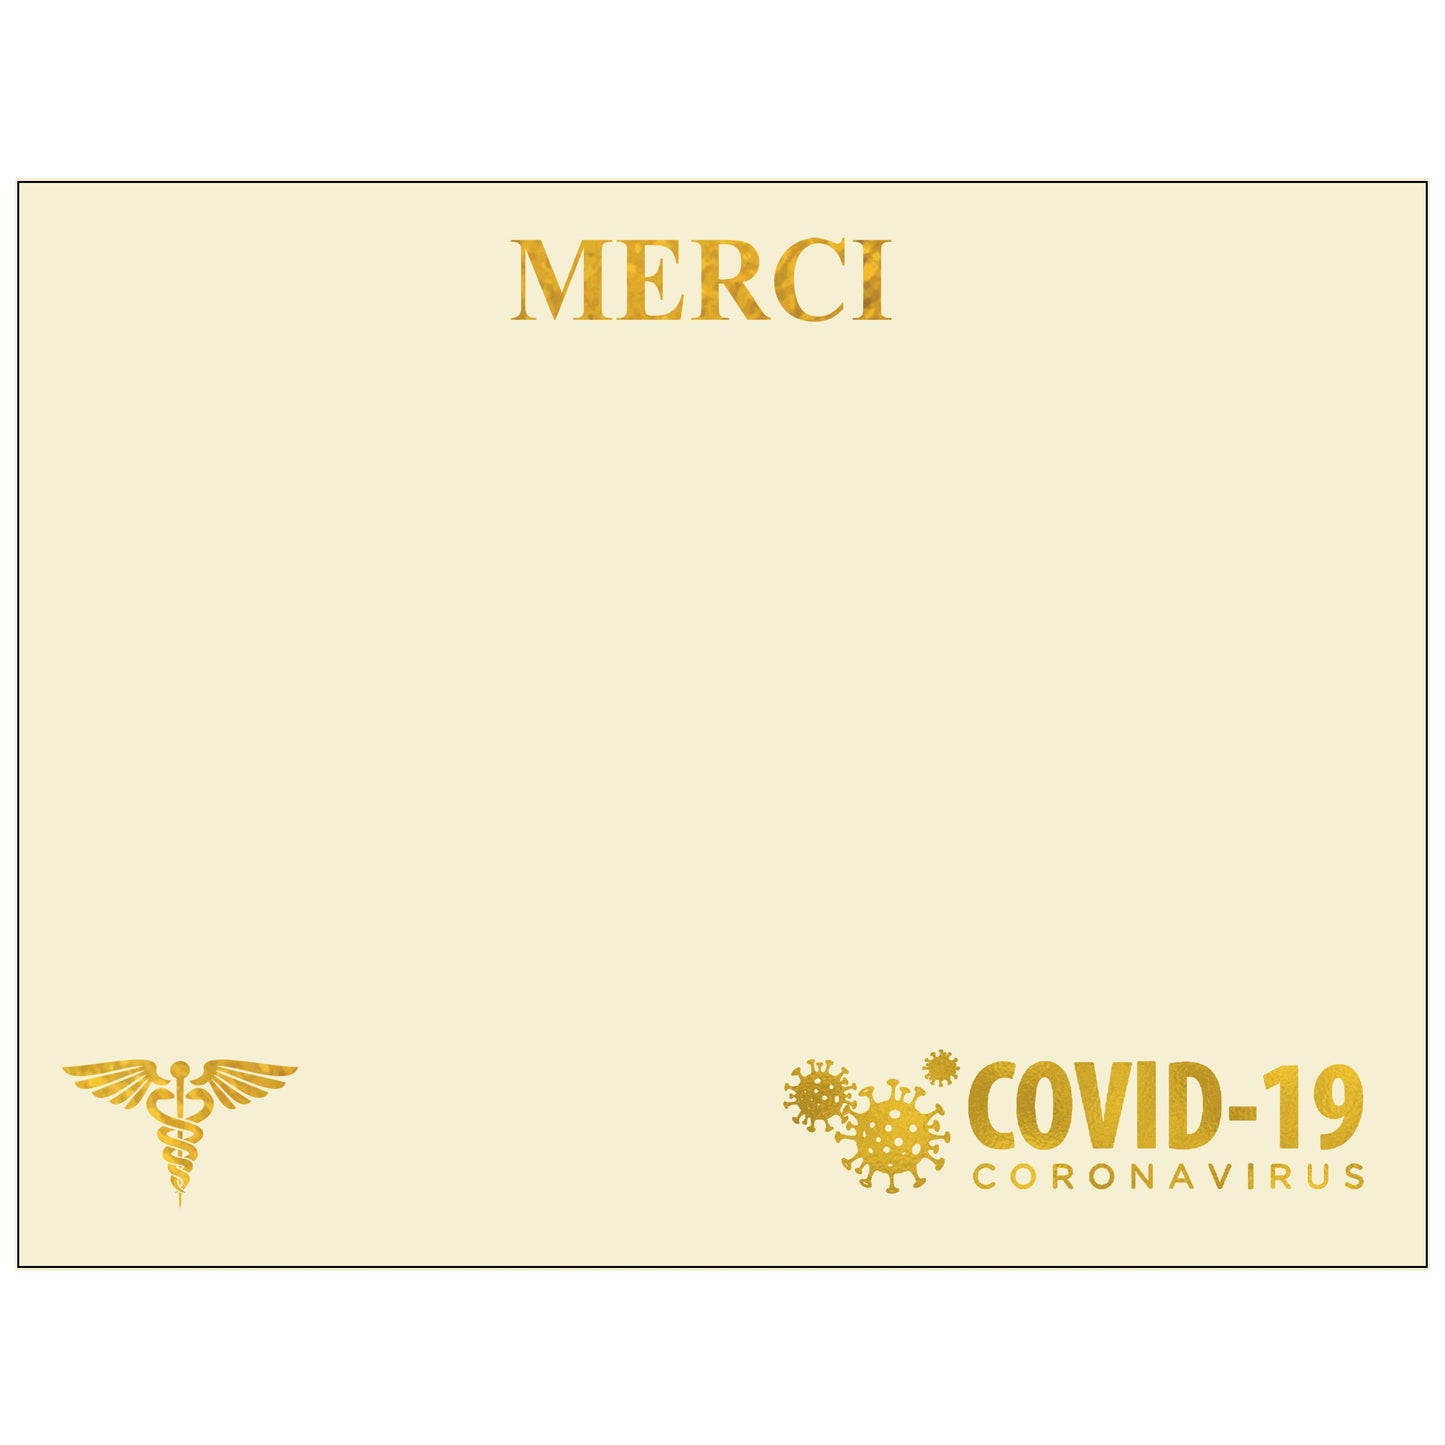 St. James® Premium Weight "Merci" Certificates, Gold Foil, Ivory, 65 lb, 8.5 x 11", Pack of 25